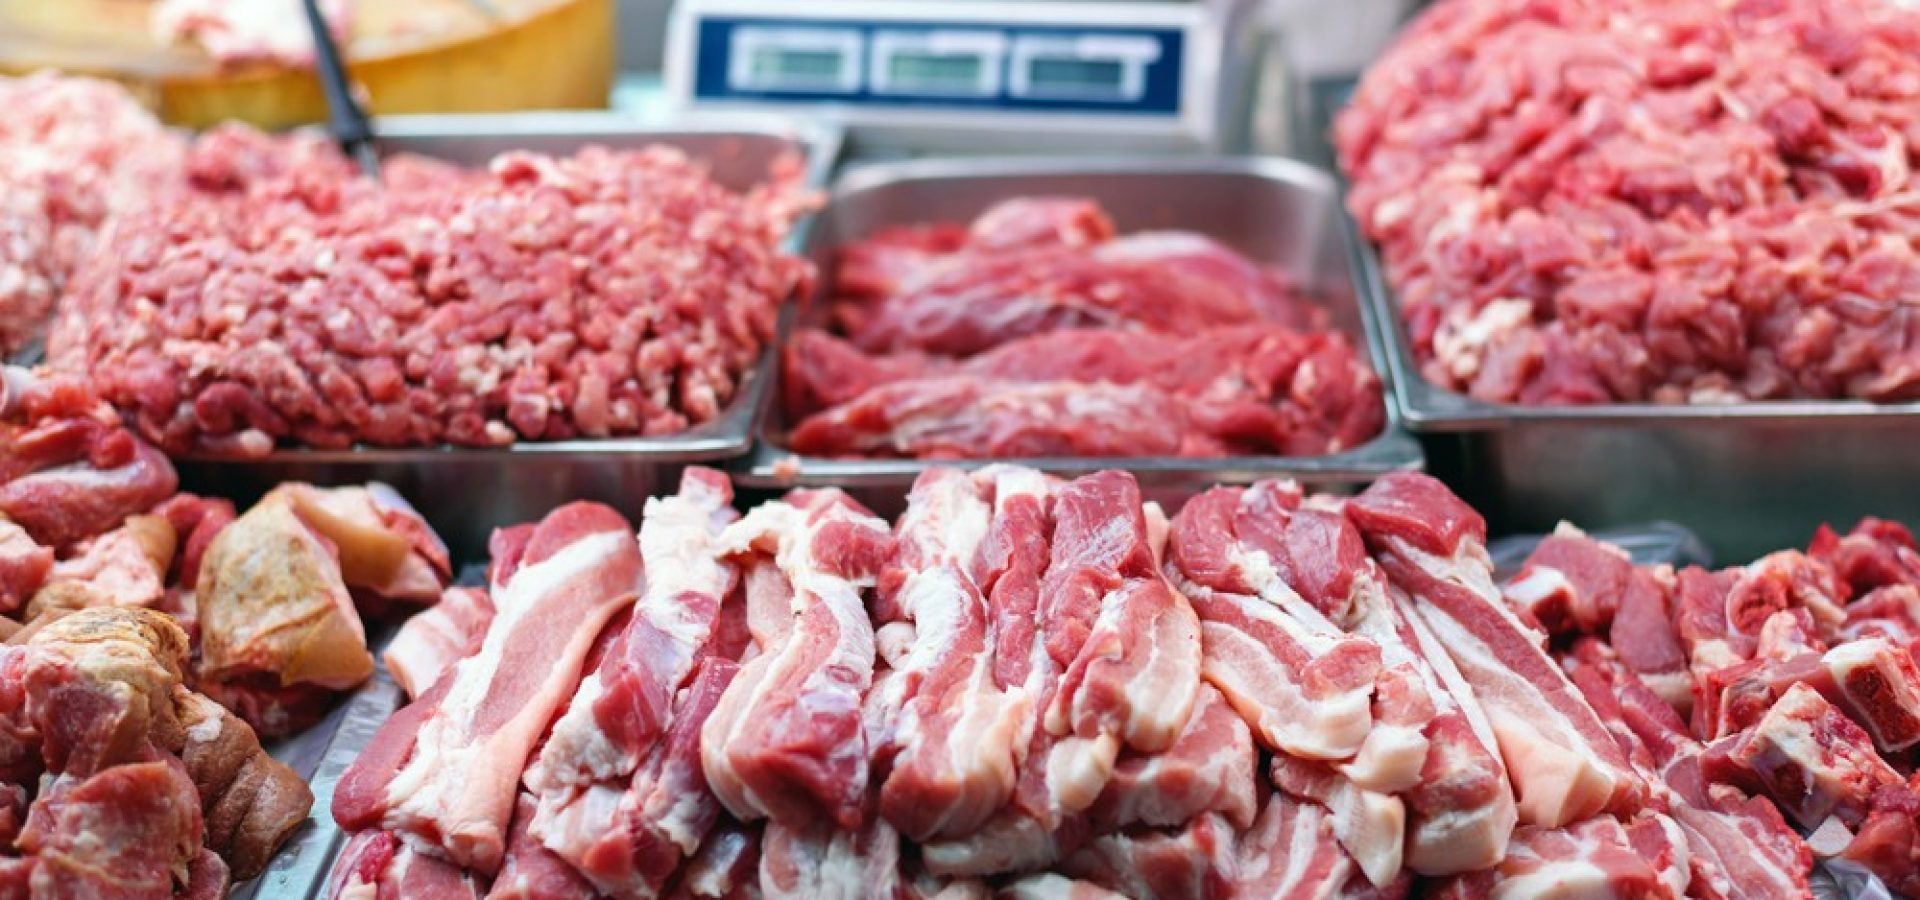 Wibest – Pig: Pork meat presented in a market stall.